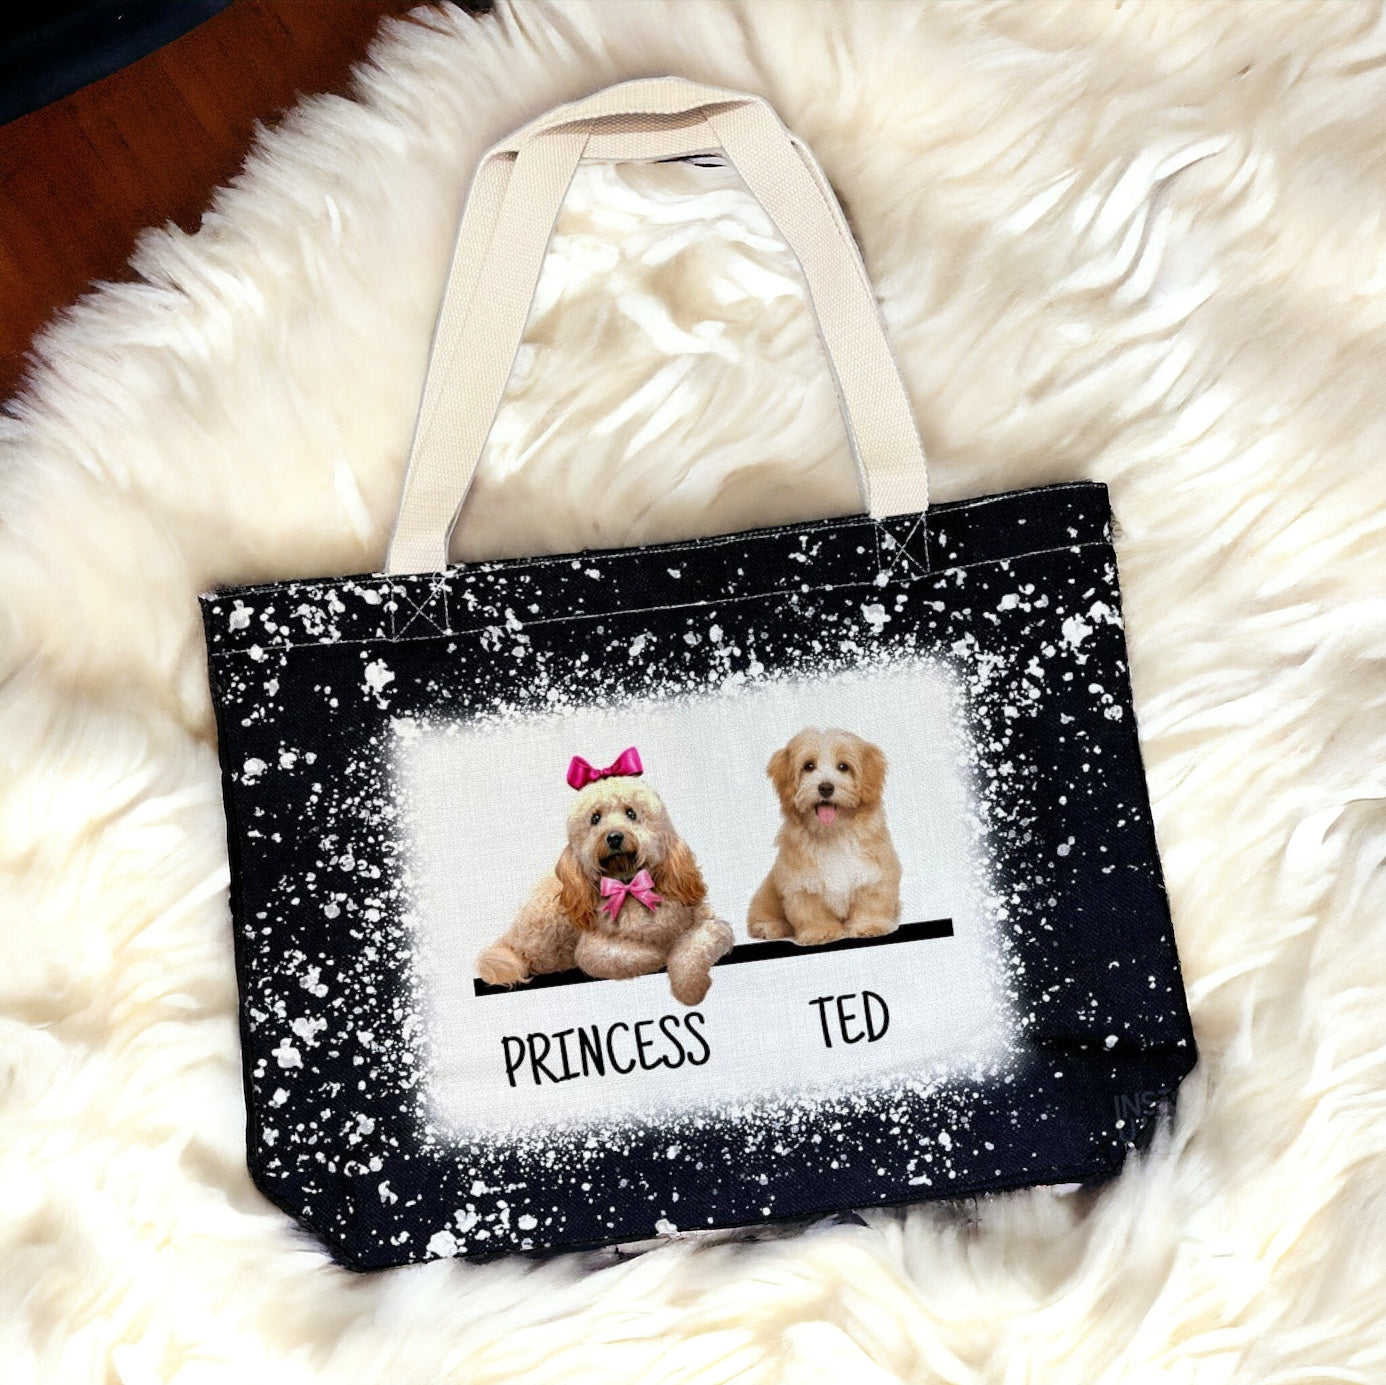 Pick Your Cute Dogs and Name Custom Tote - Black Bleach Design Tote Bag - Add up to 6 dogs!